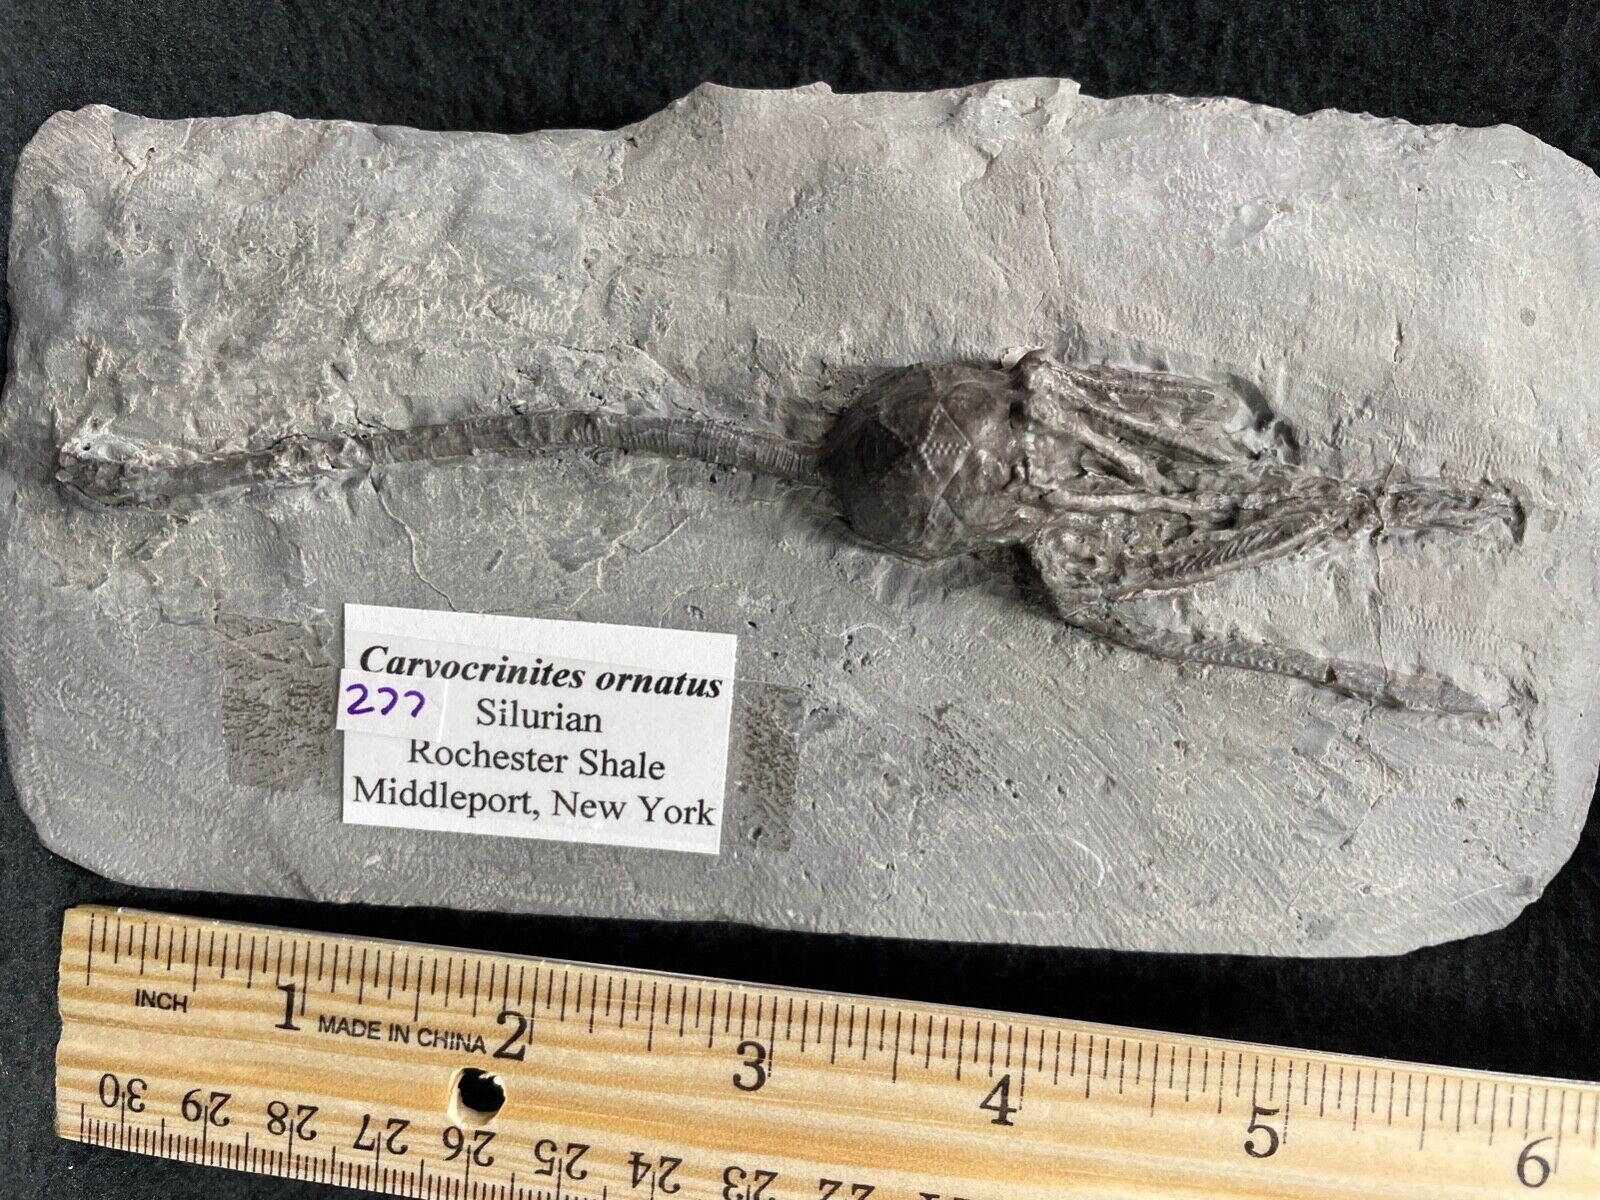 Crinoid Relation, Big Fat Head Fossil Cystoid, Middleport, NY